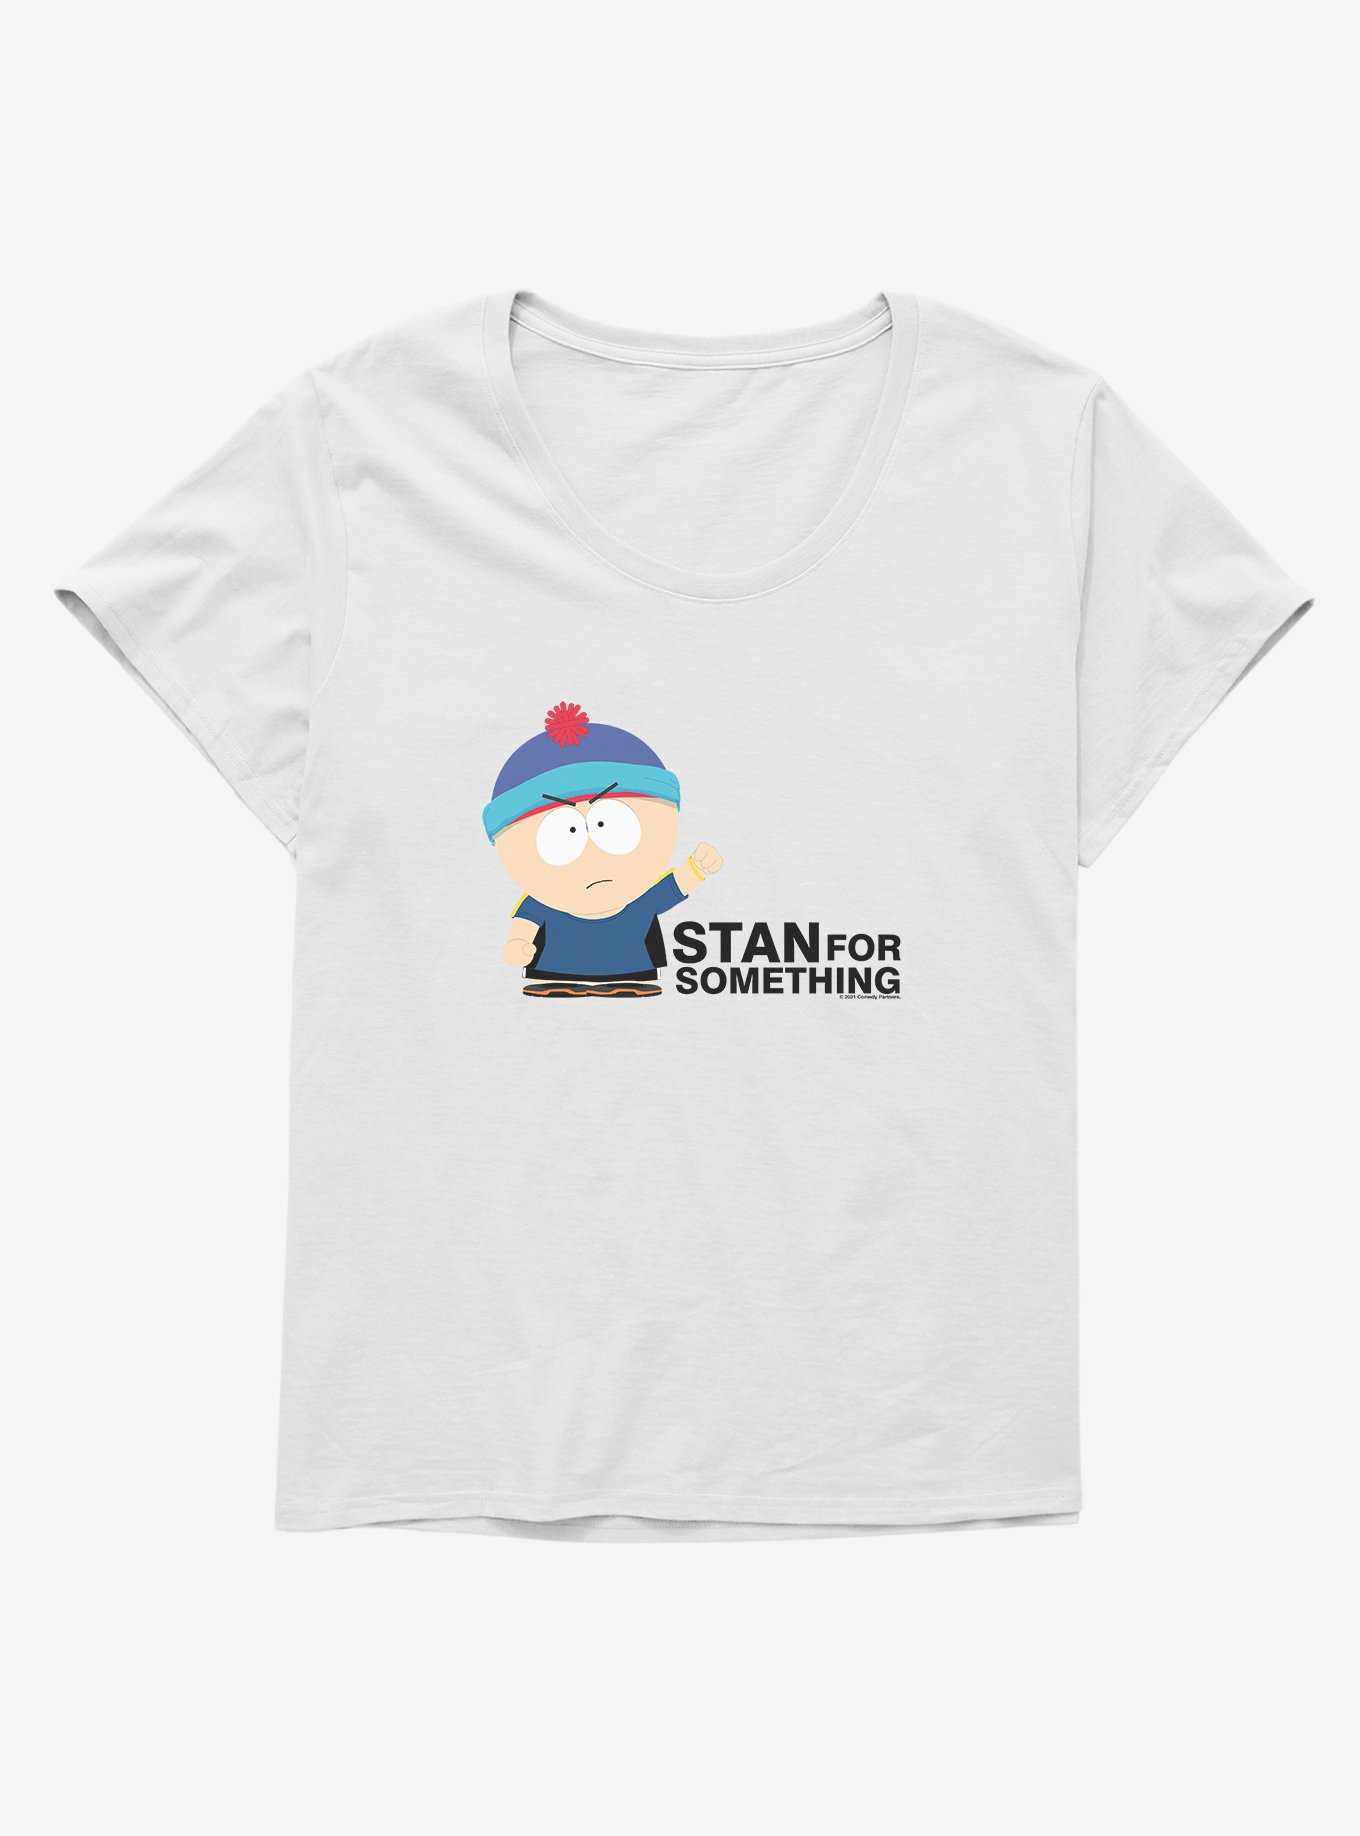 South Park Season Reference Stan For Something Girls T-Shirt Plus Size, , hi-res